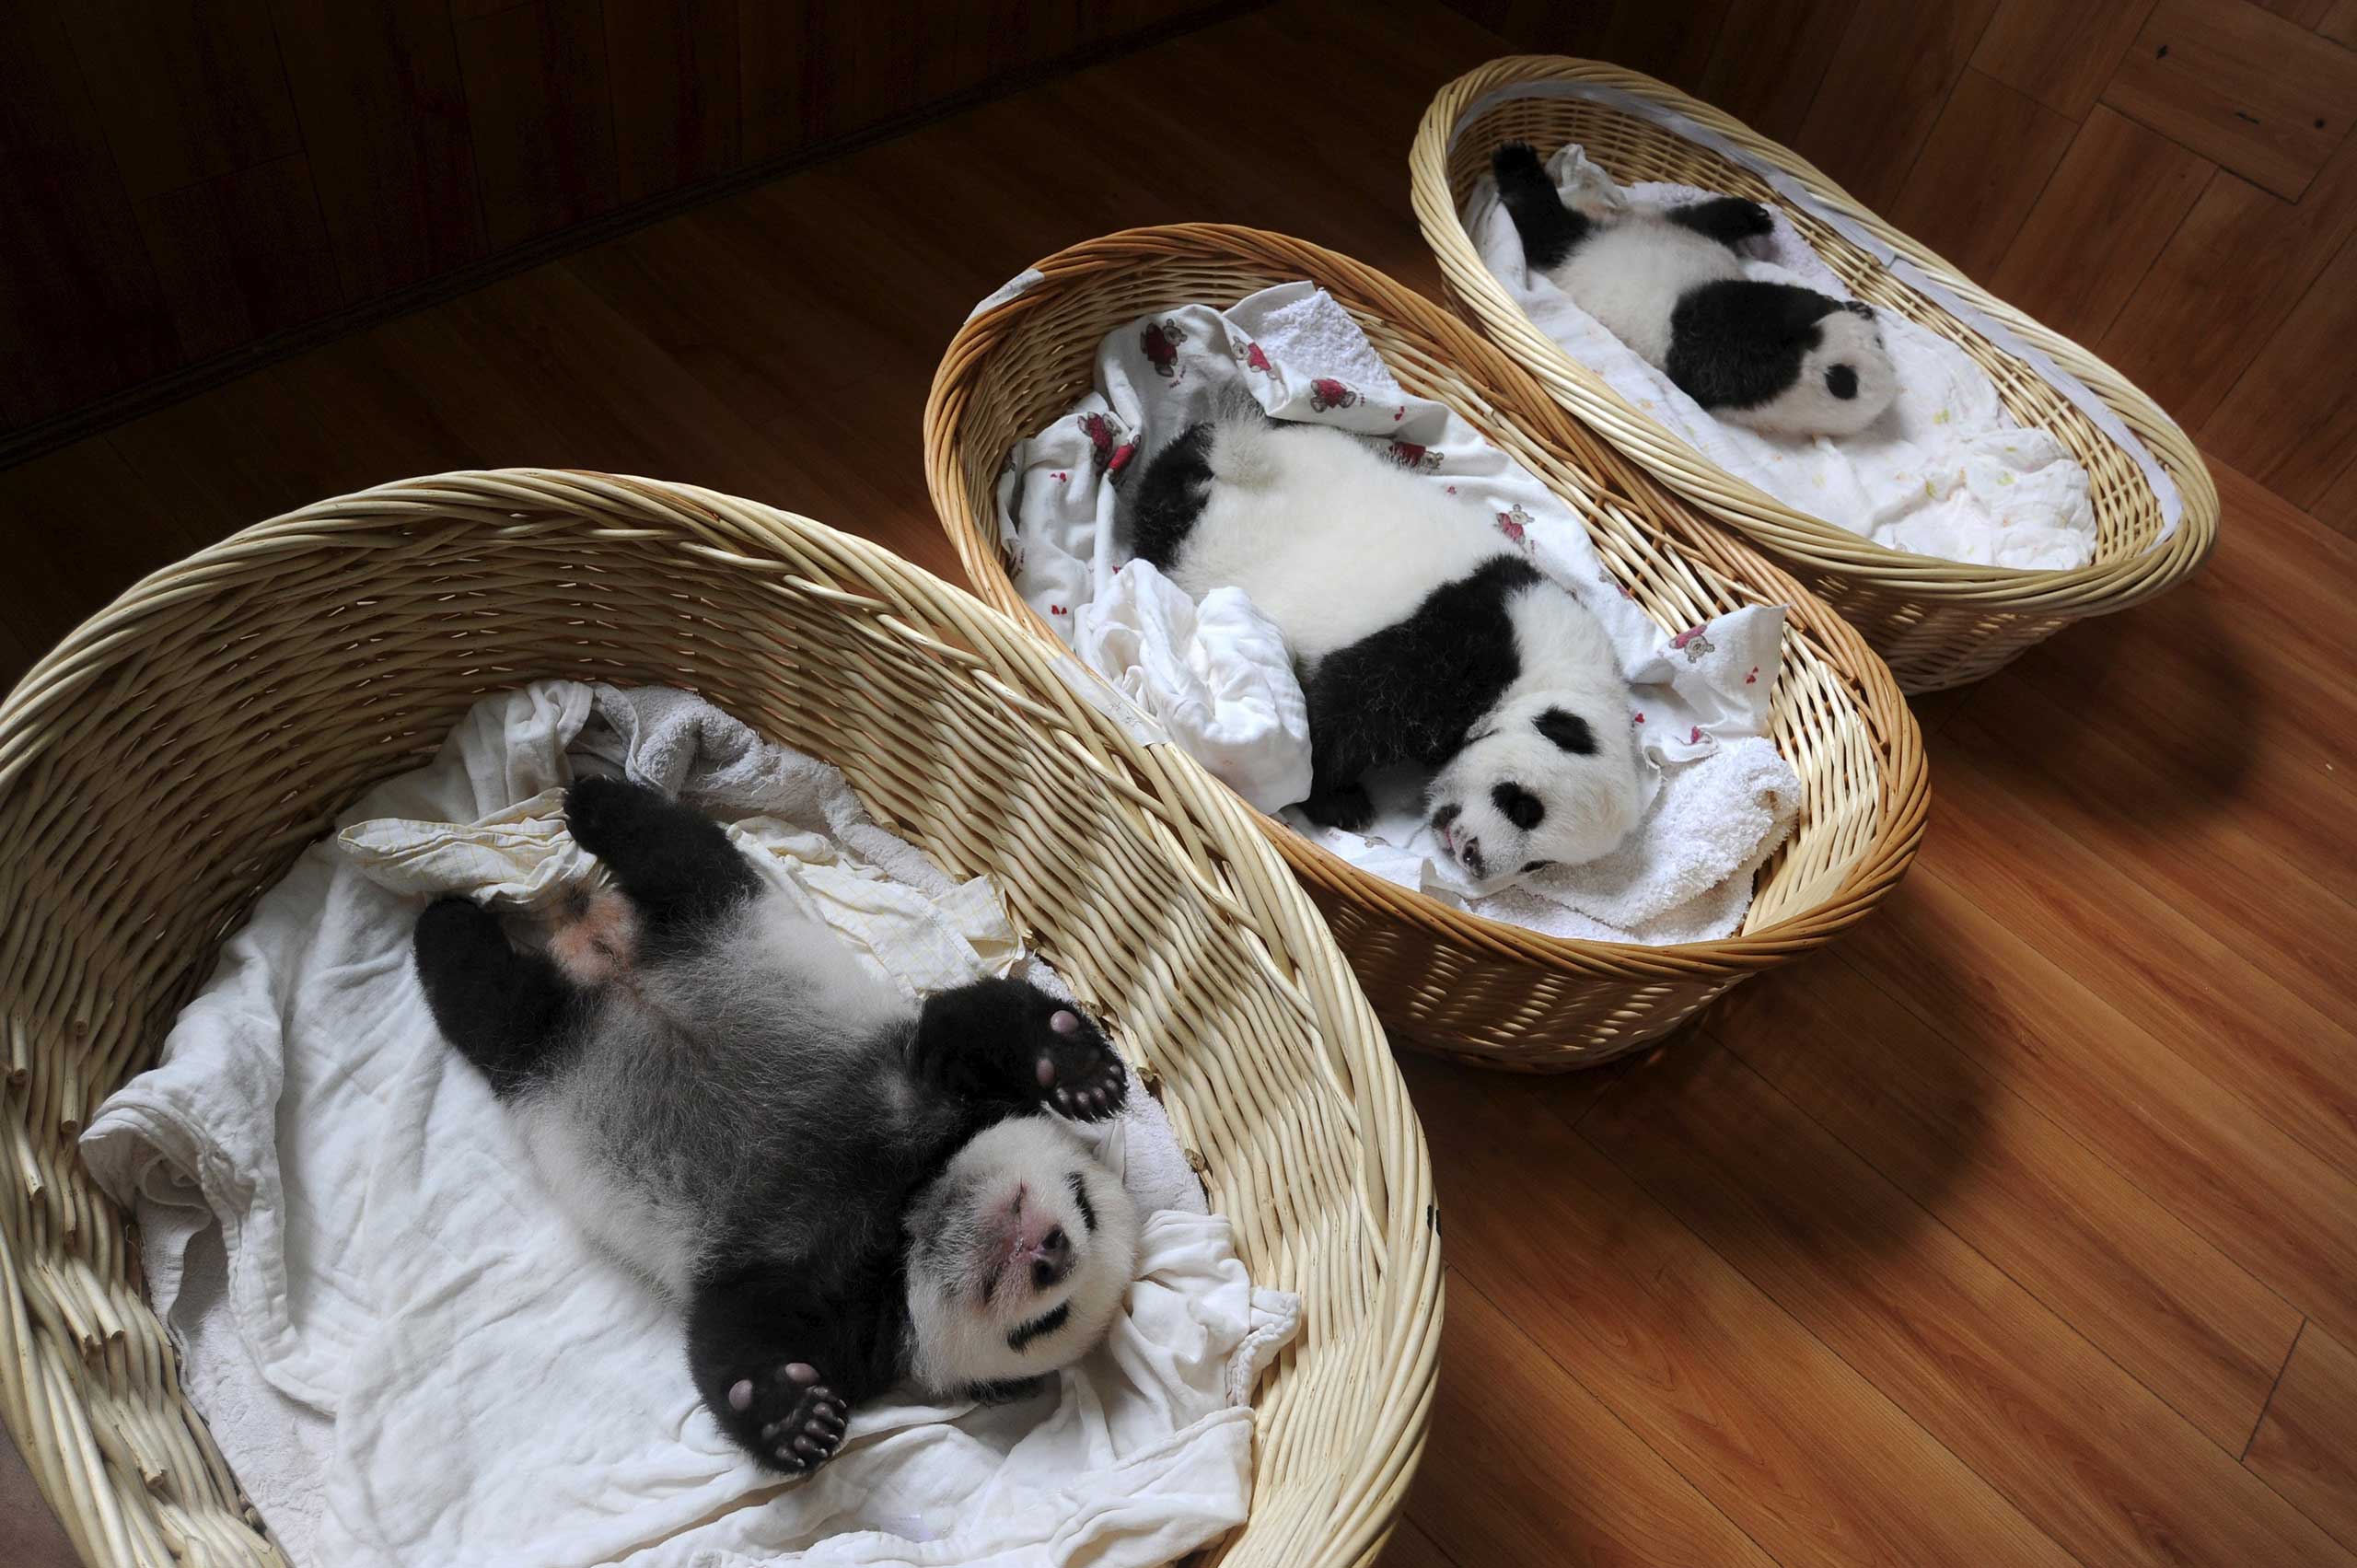 Giant panda cubs are seen inside baskets during their debut appearance to visitors at a giant panda breeding centre in Ya'an, Sichuan province, China, on Aug. 21, 2015. (Reuters)